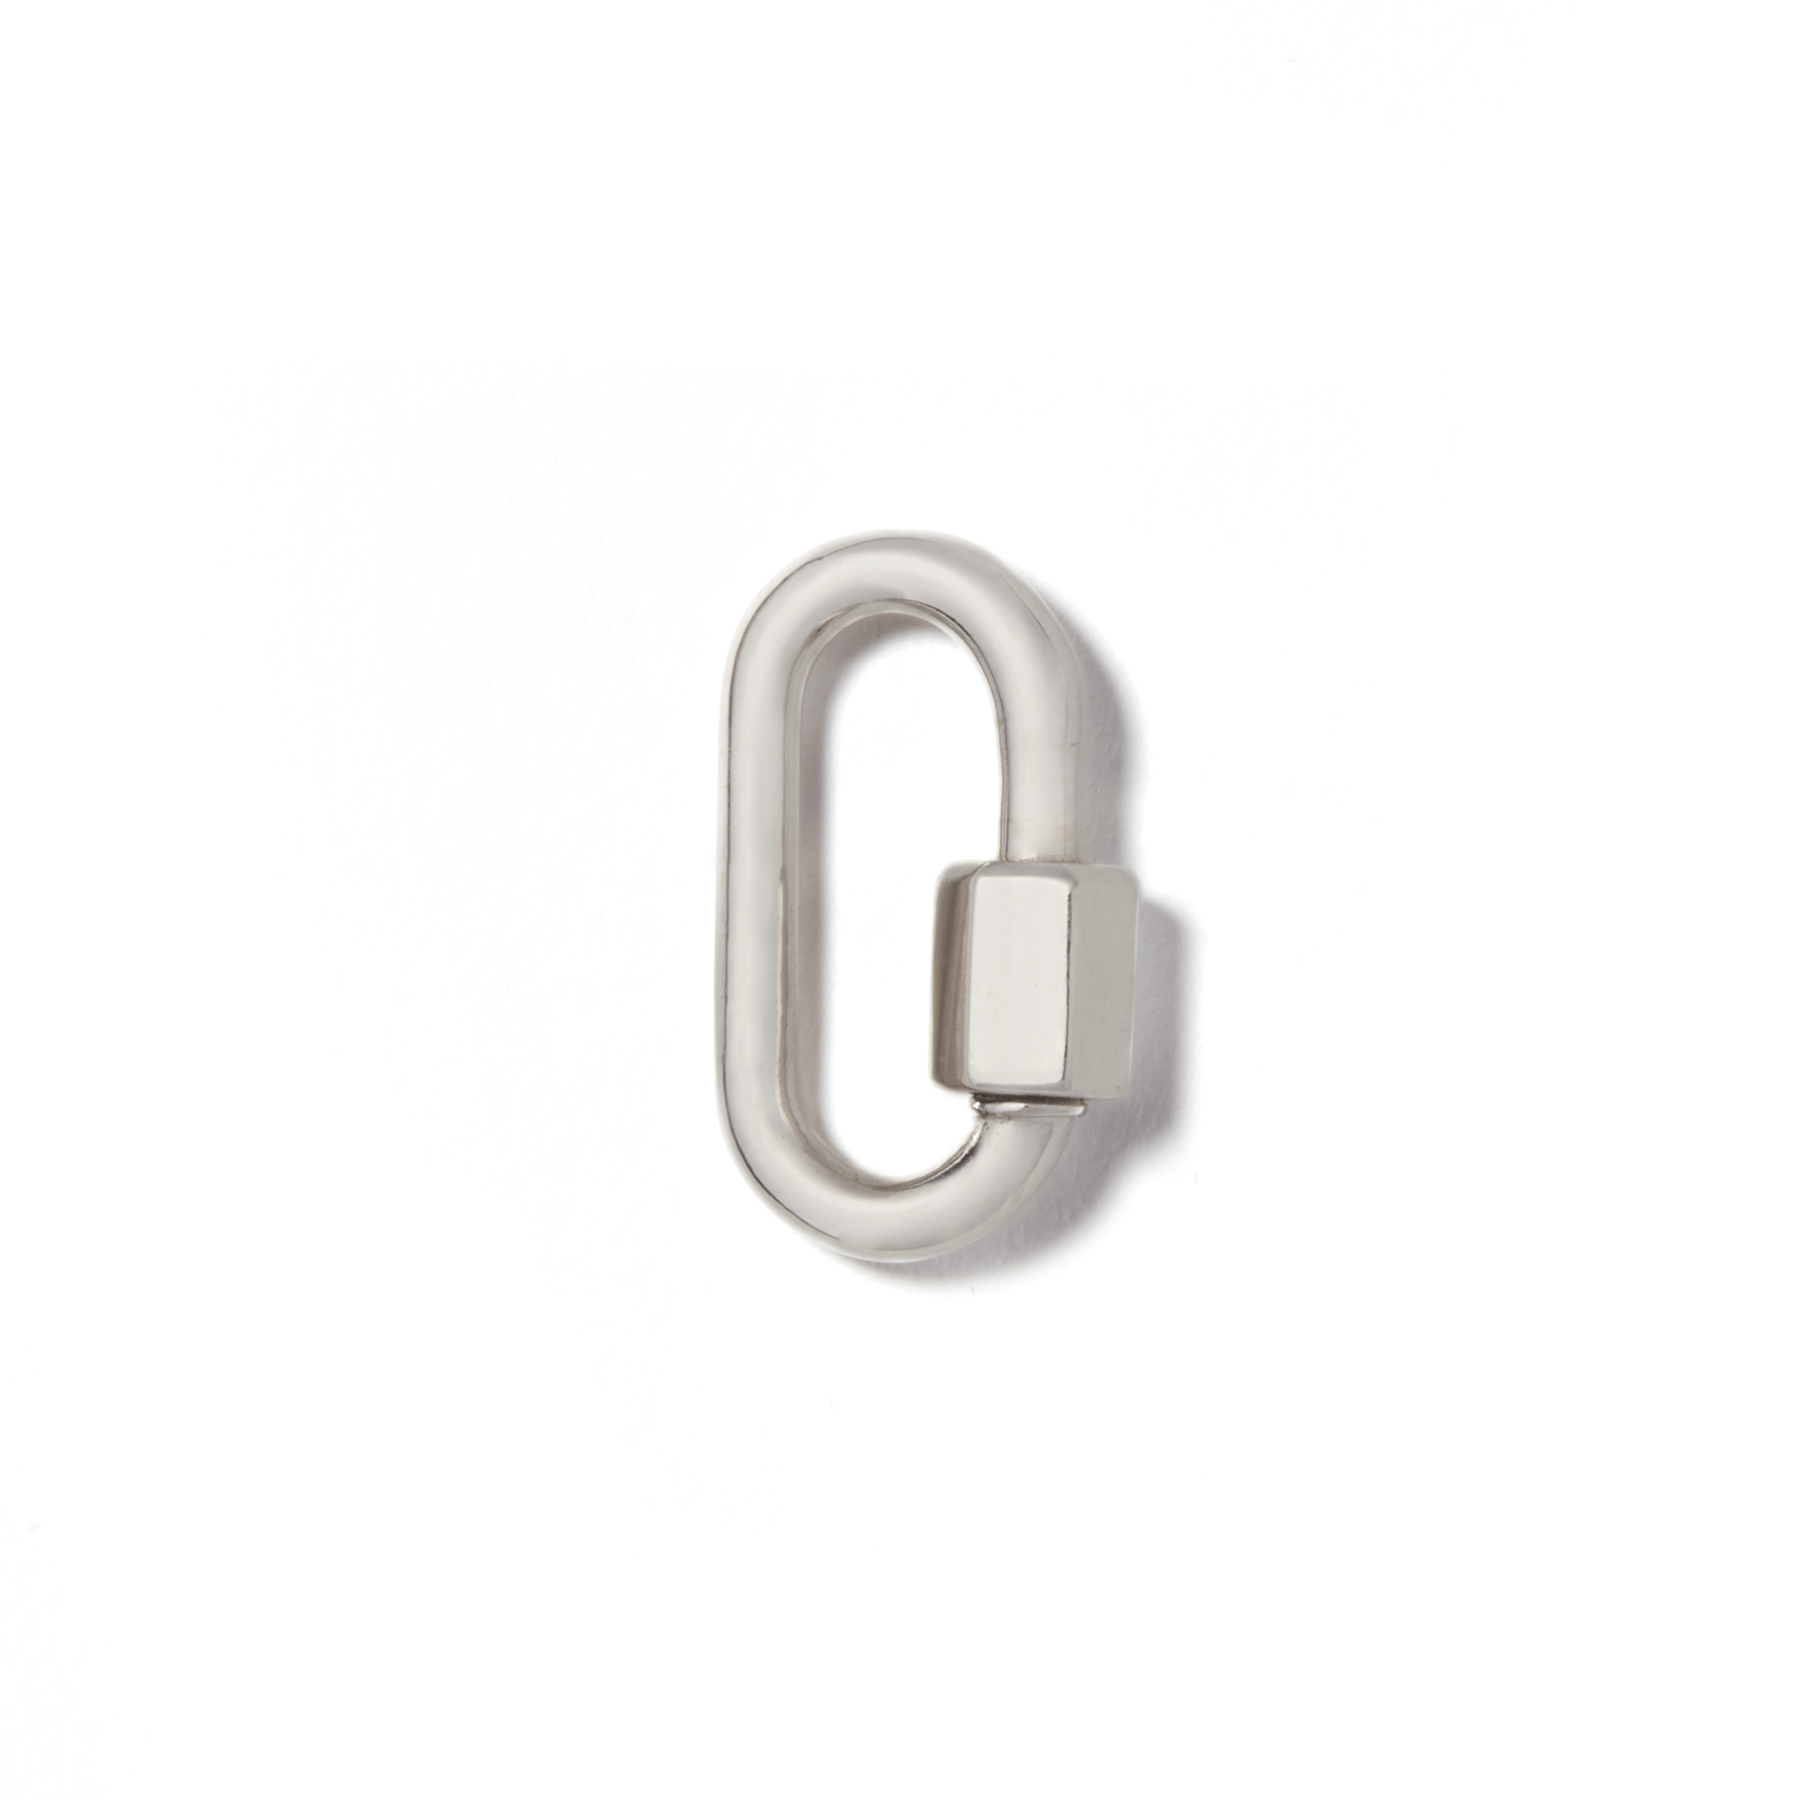 Small silver lock against white backdrop